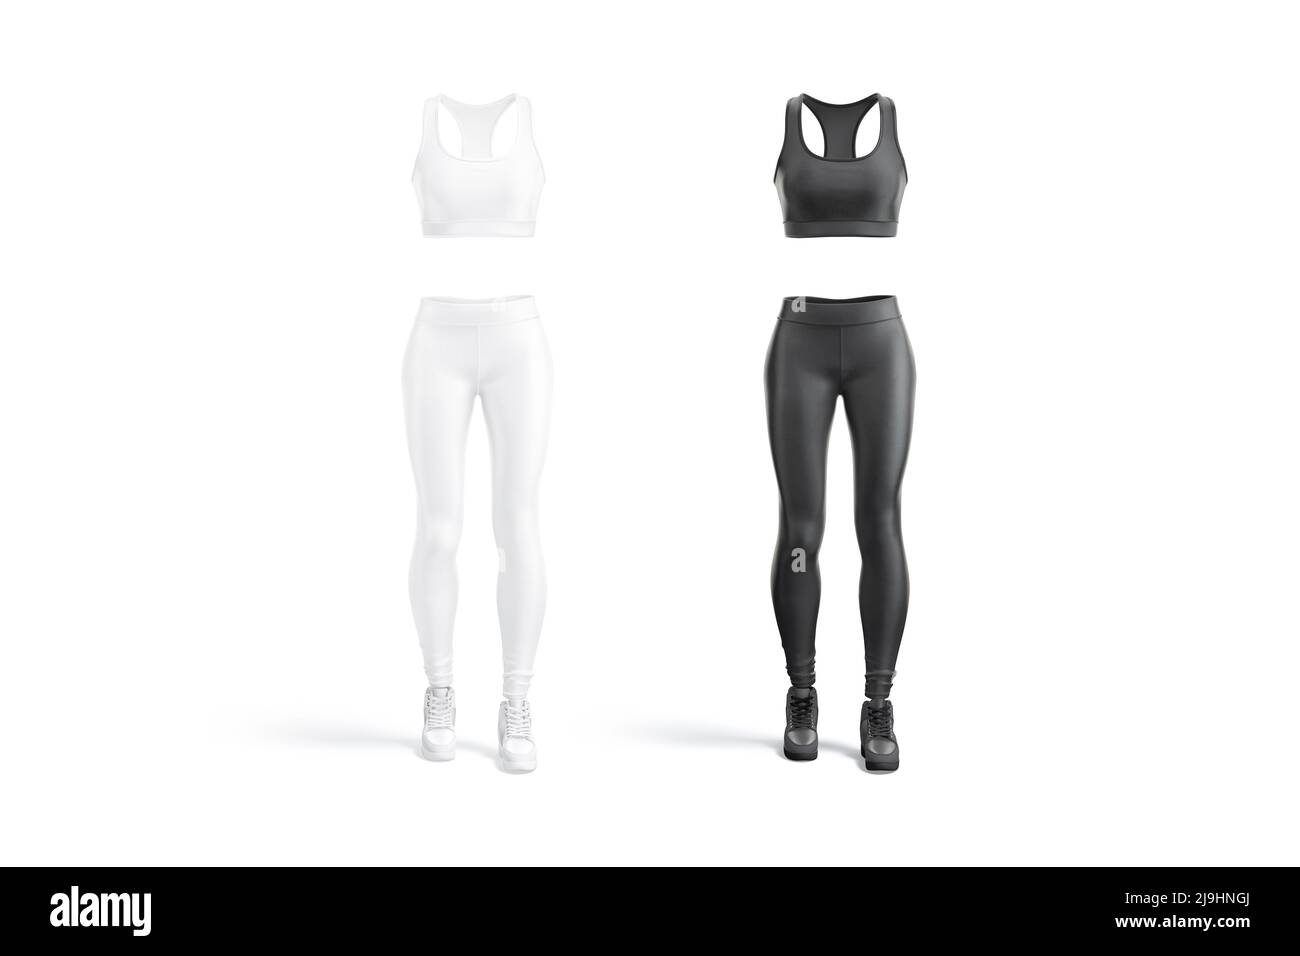 Blank black and white women sport uniform mockup, front view Stock Photo